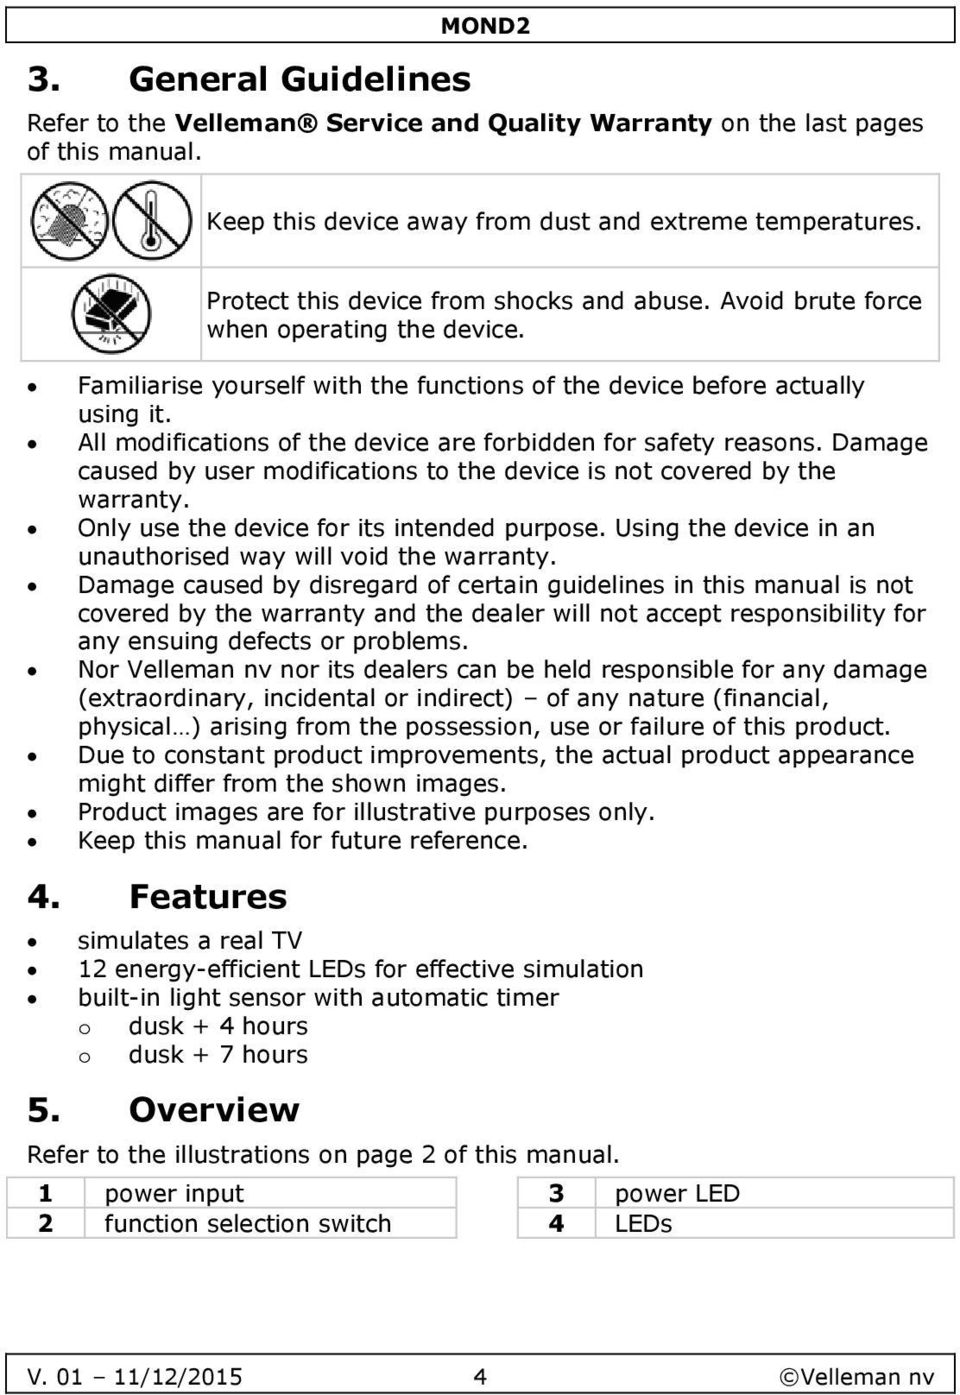 All modifications of the device are forbidden for safety reasons. Damage caused by user modifications to the device is not covered by the warranty. Only use the device for its intended purpose.